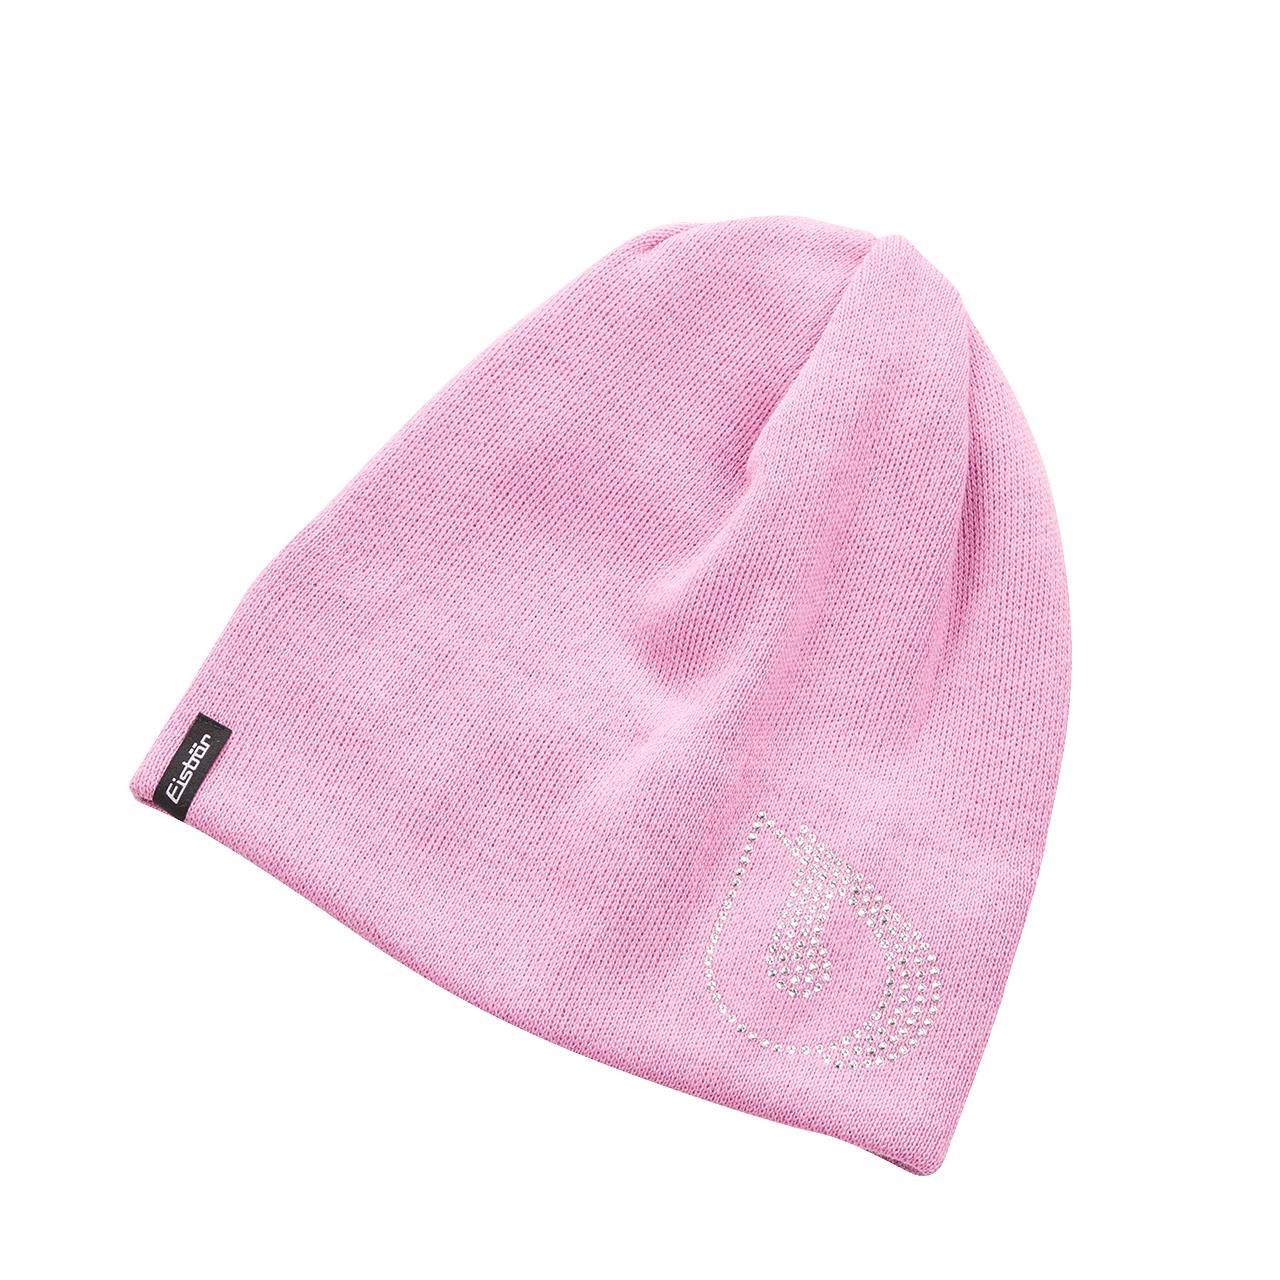 Bonnet Ladies in pink from BWT